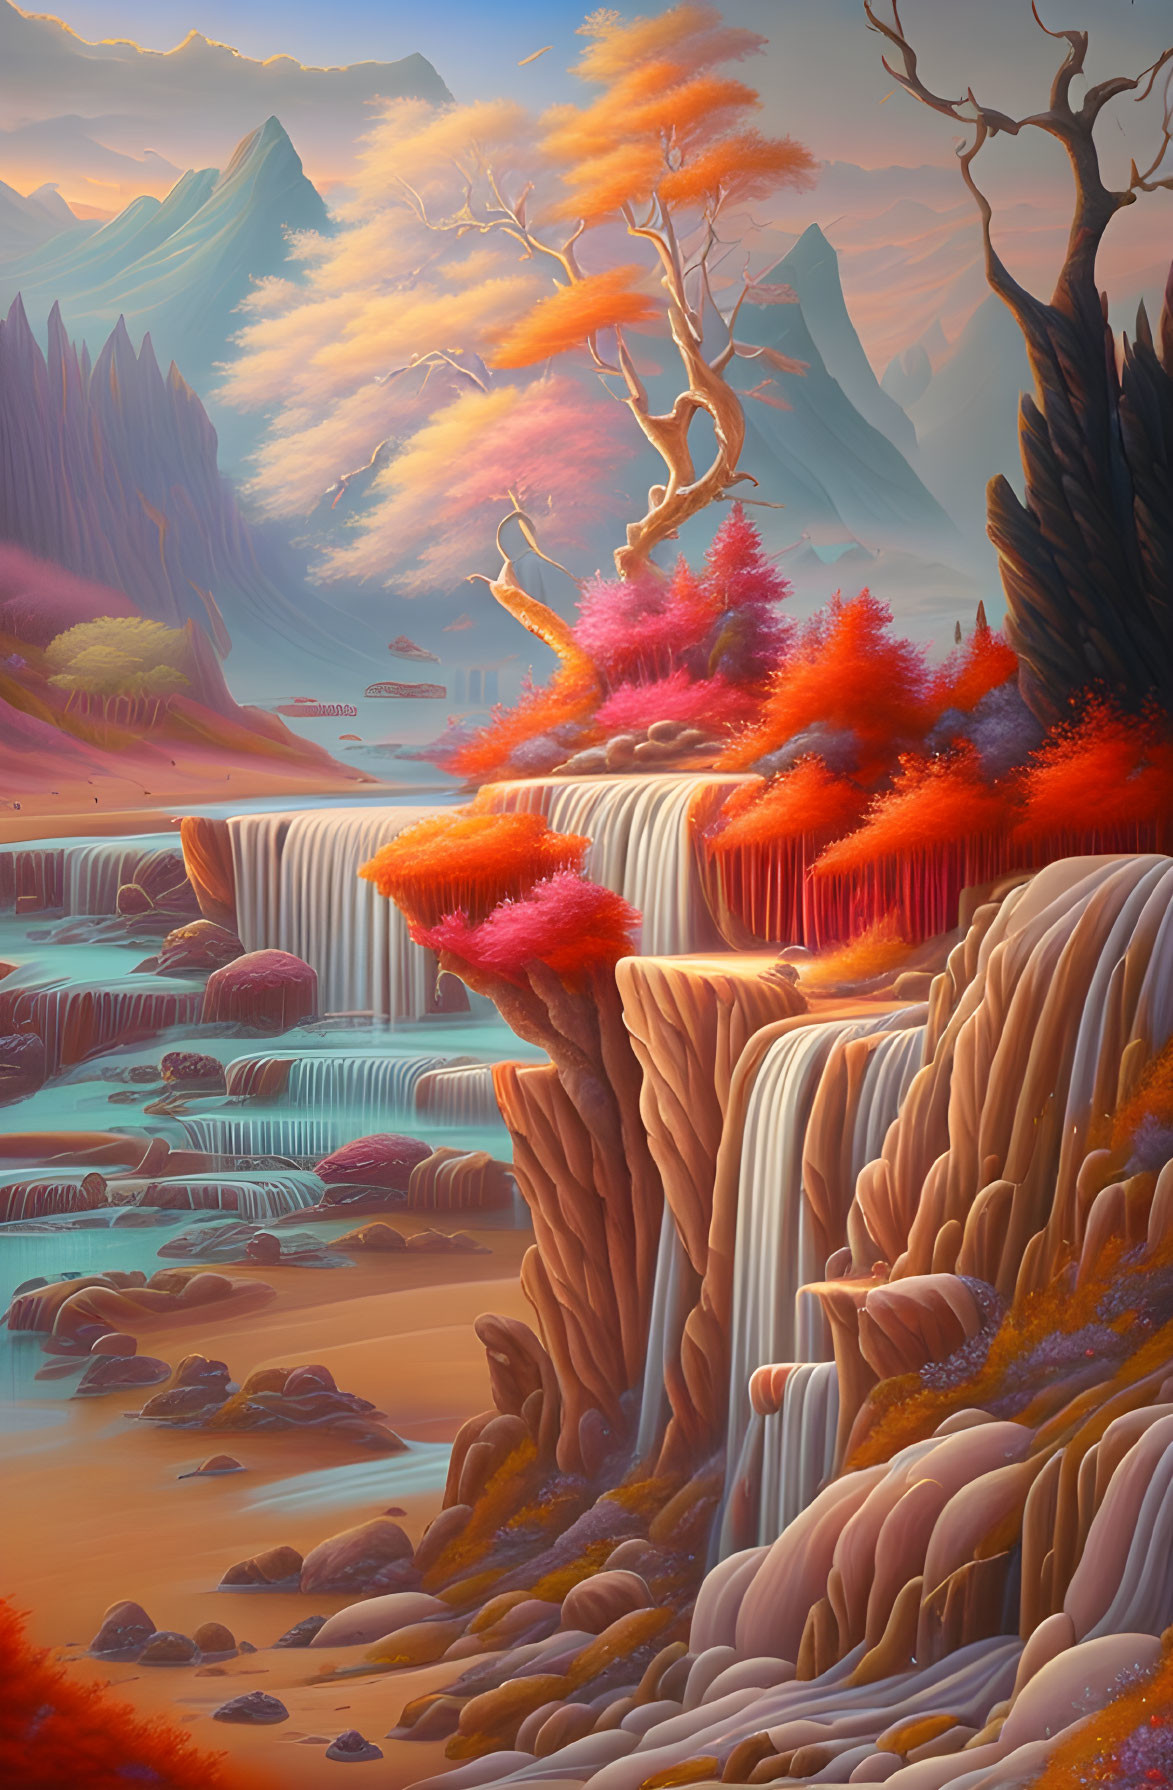 Surreal landscape with waterfalls, autumn foliage, cliffs, and pastel sky